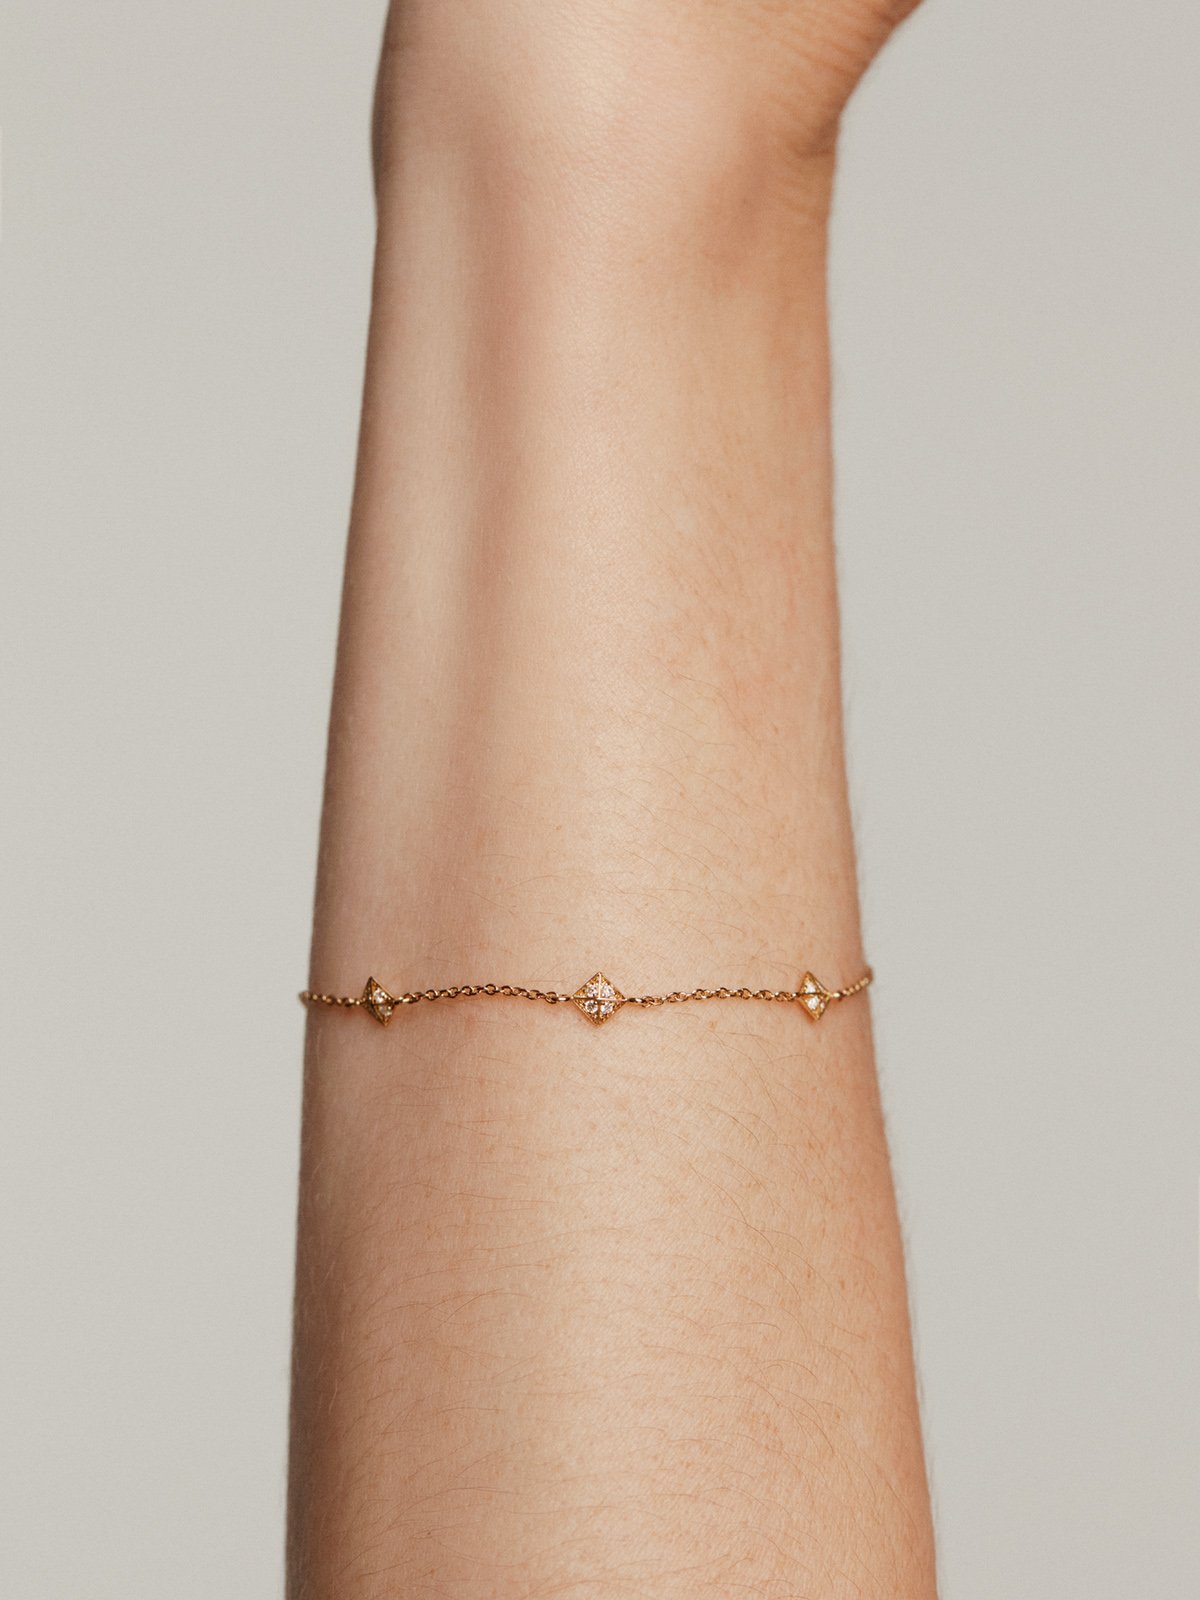 18K yellow gold bracelet with geometric shapes and diamonds